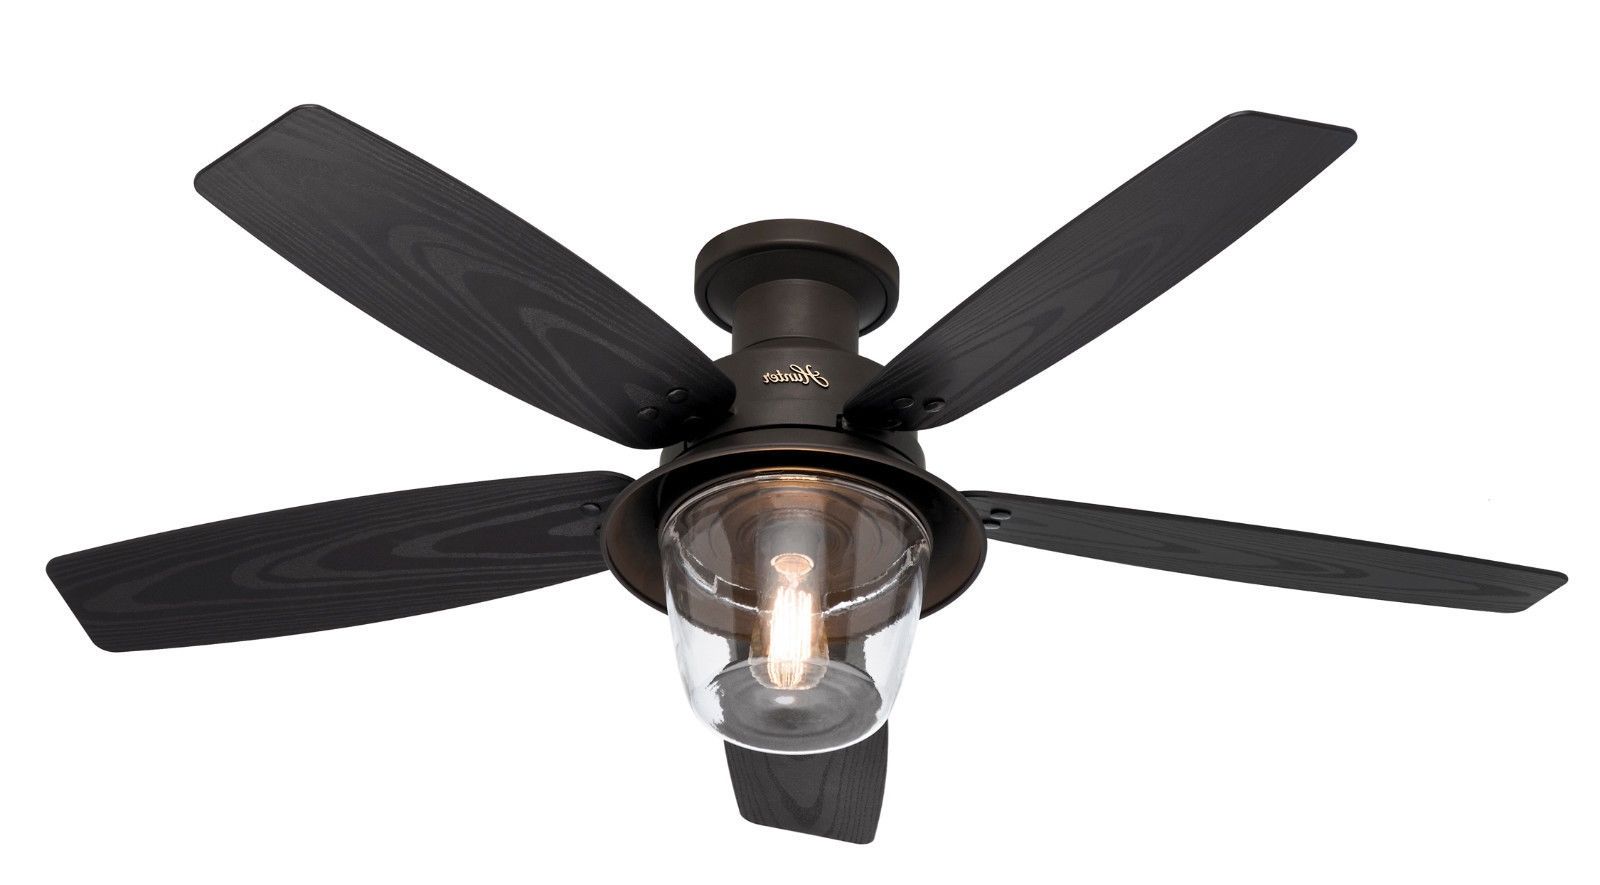 Ceiling: Astounding Small Outdoor Ceiling Fan Hunter Outdoor Ceiling Throughout Well Known Small Outdoor Ceiling Fans With Lights (View 1 of 20)